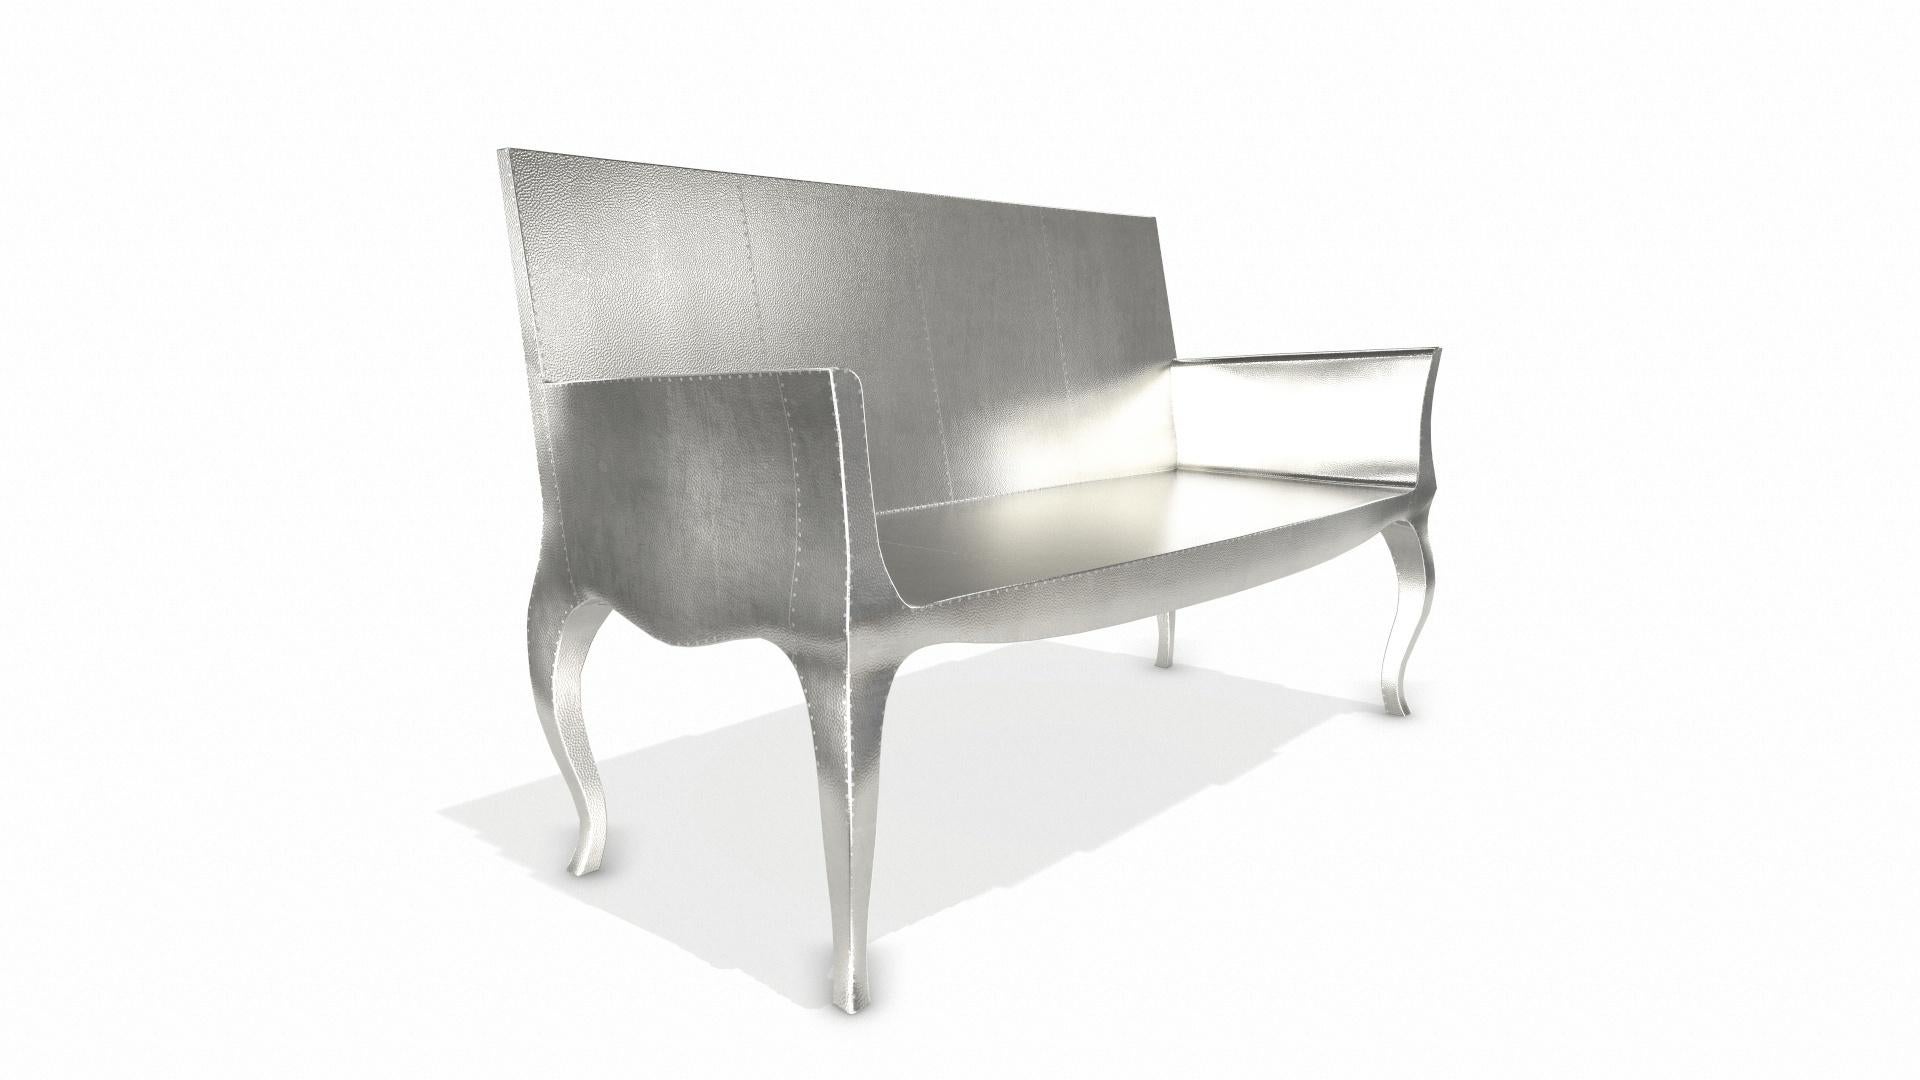 Louise Settee Art Deco Daybeds in Mid. Hammered White Bronze by Paul Mathieu In New Condition For Sale In New York, NY